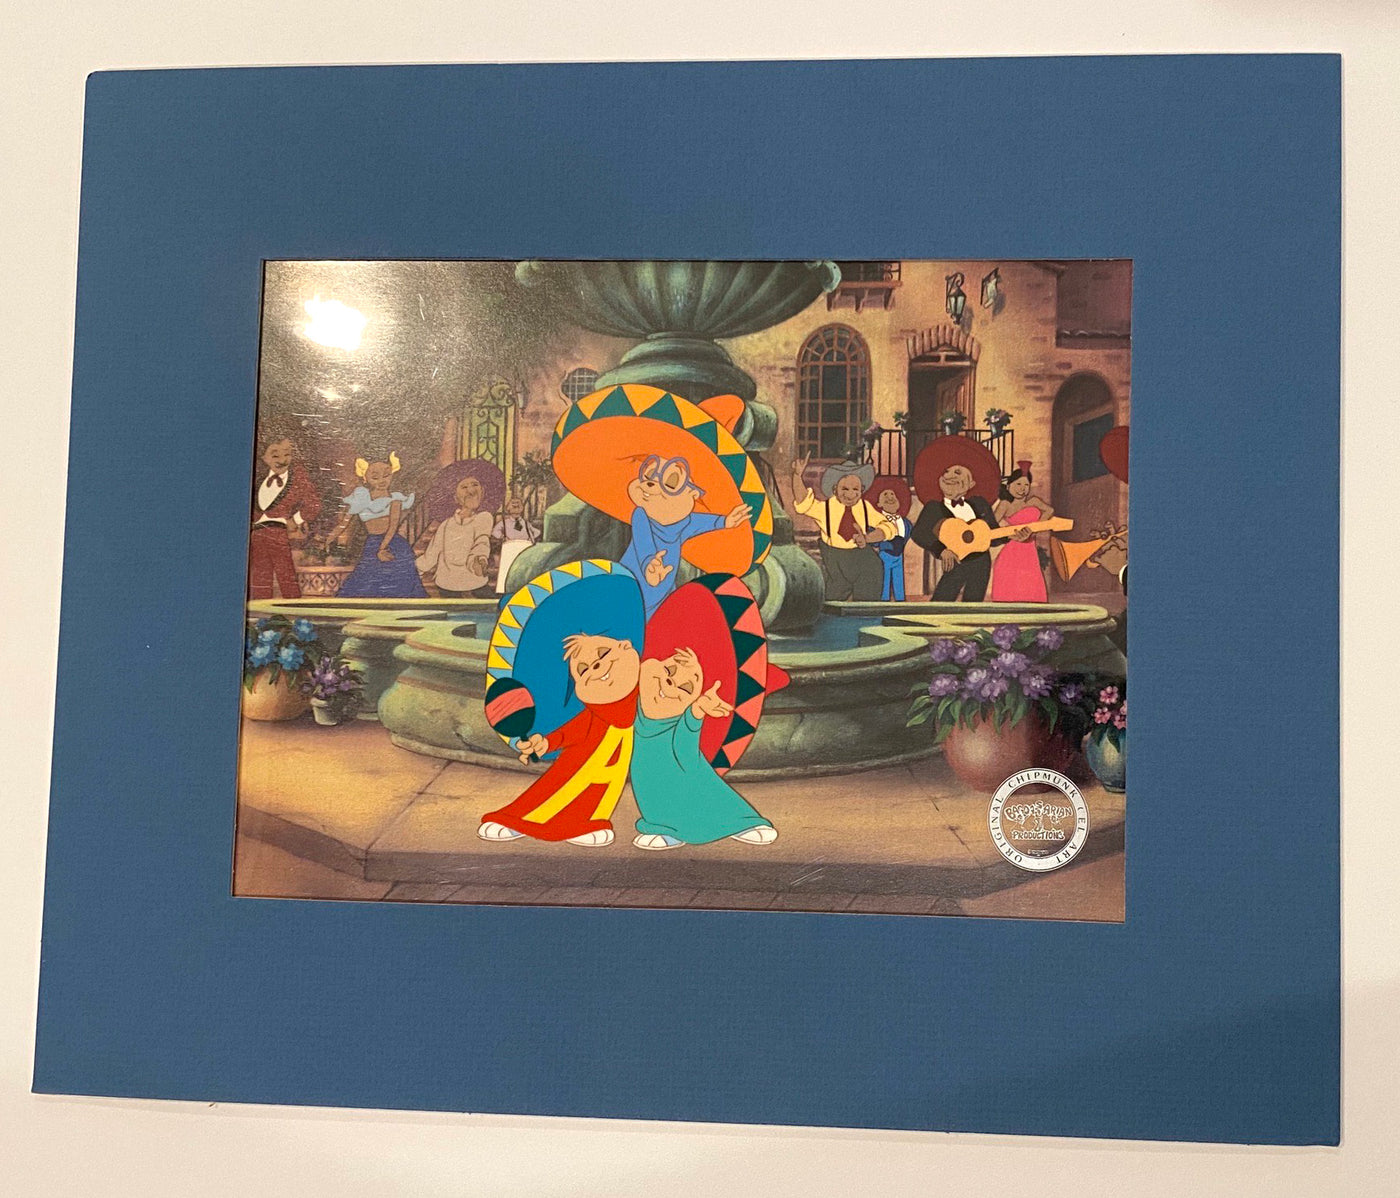 Original Bagdasarian Productions Production Cel of The Chipmunks from The Chipmunk Adventure